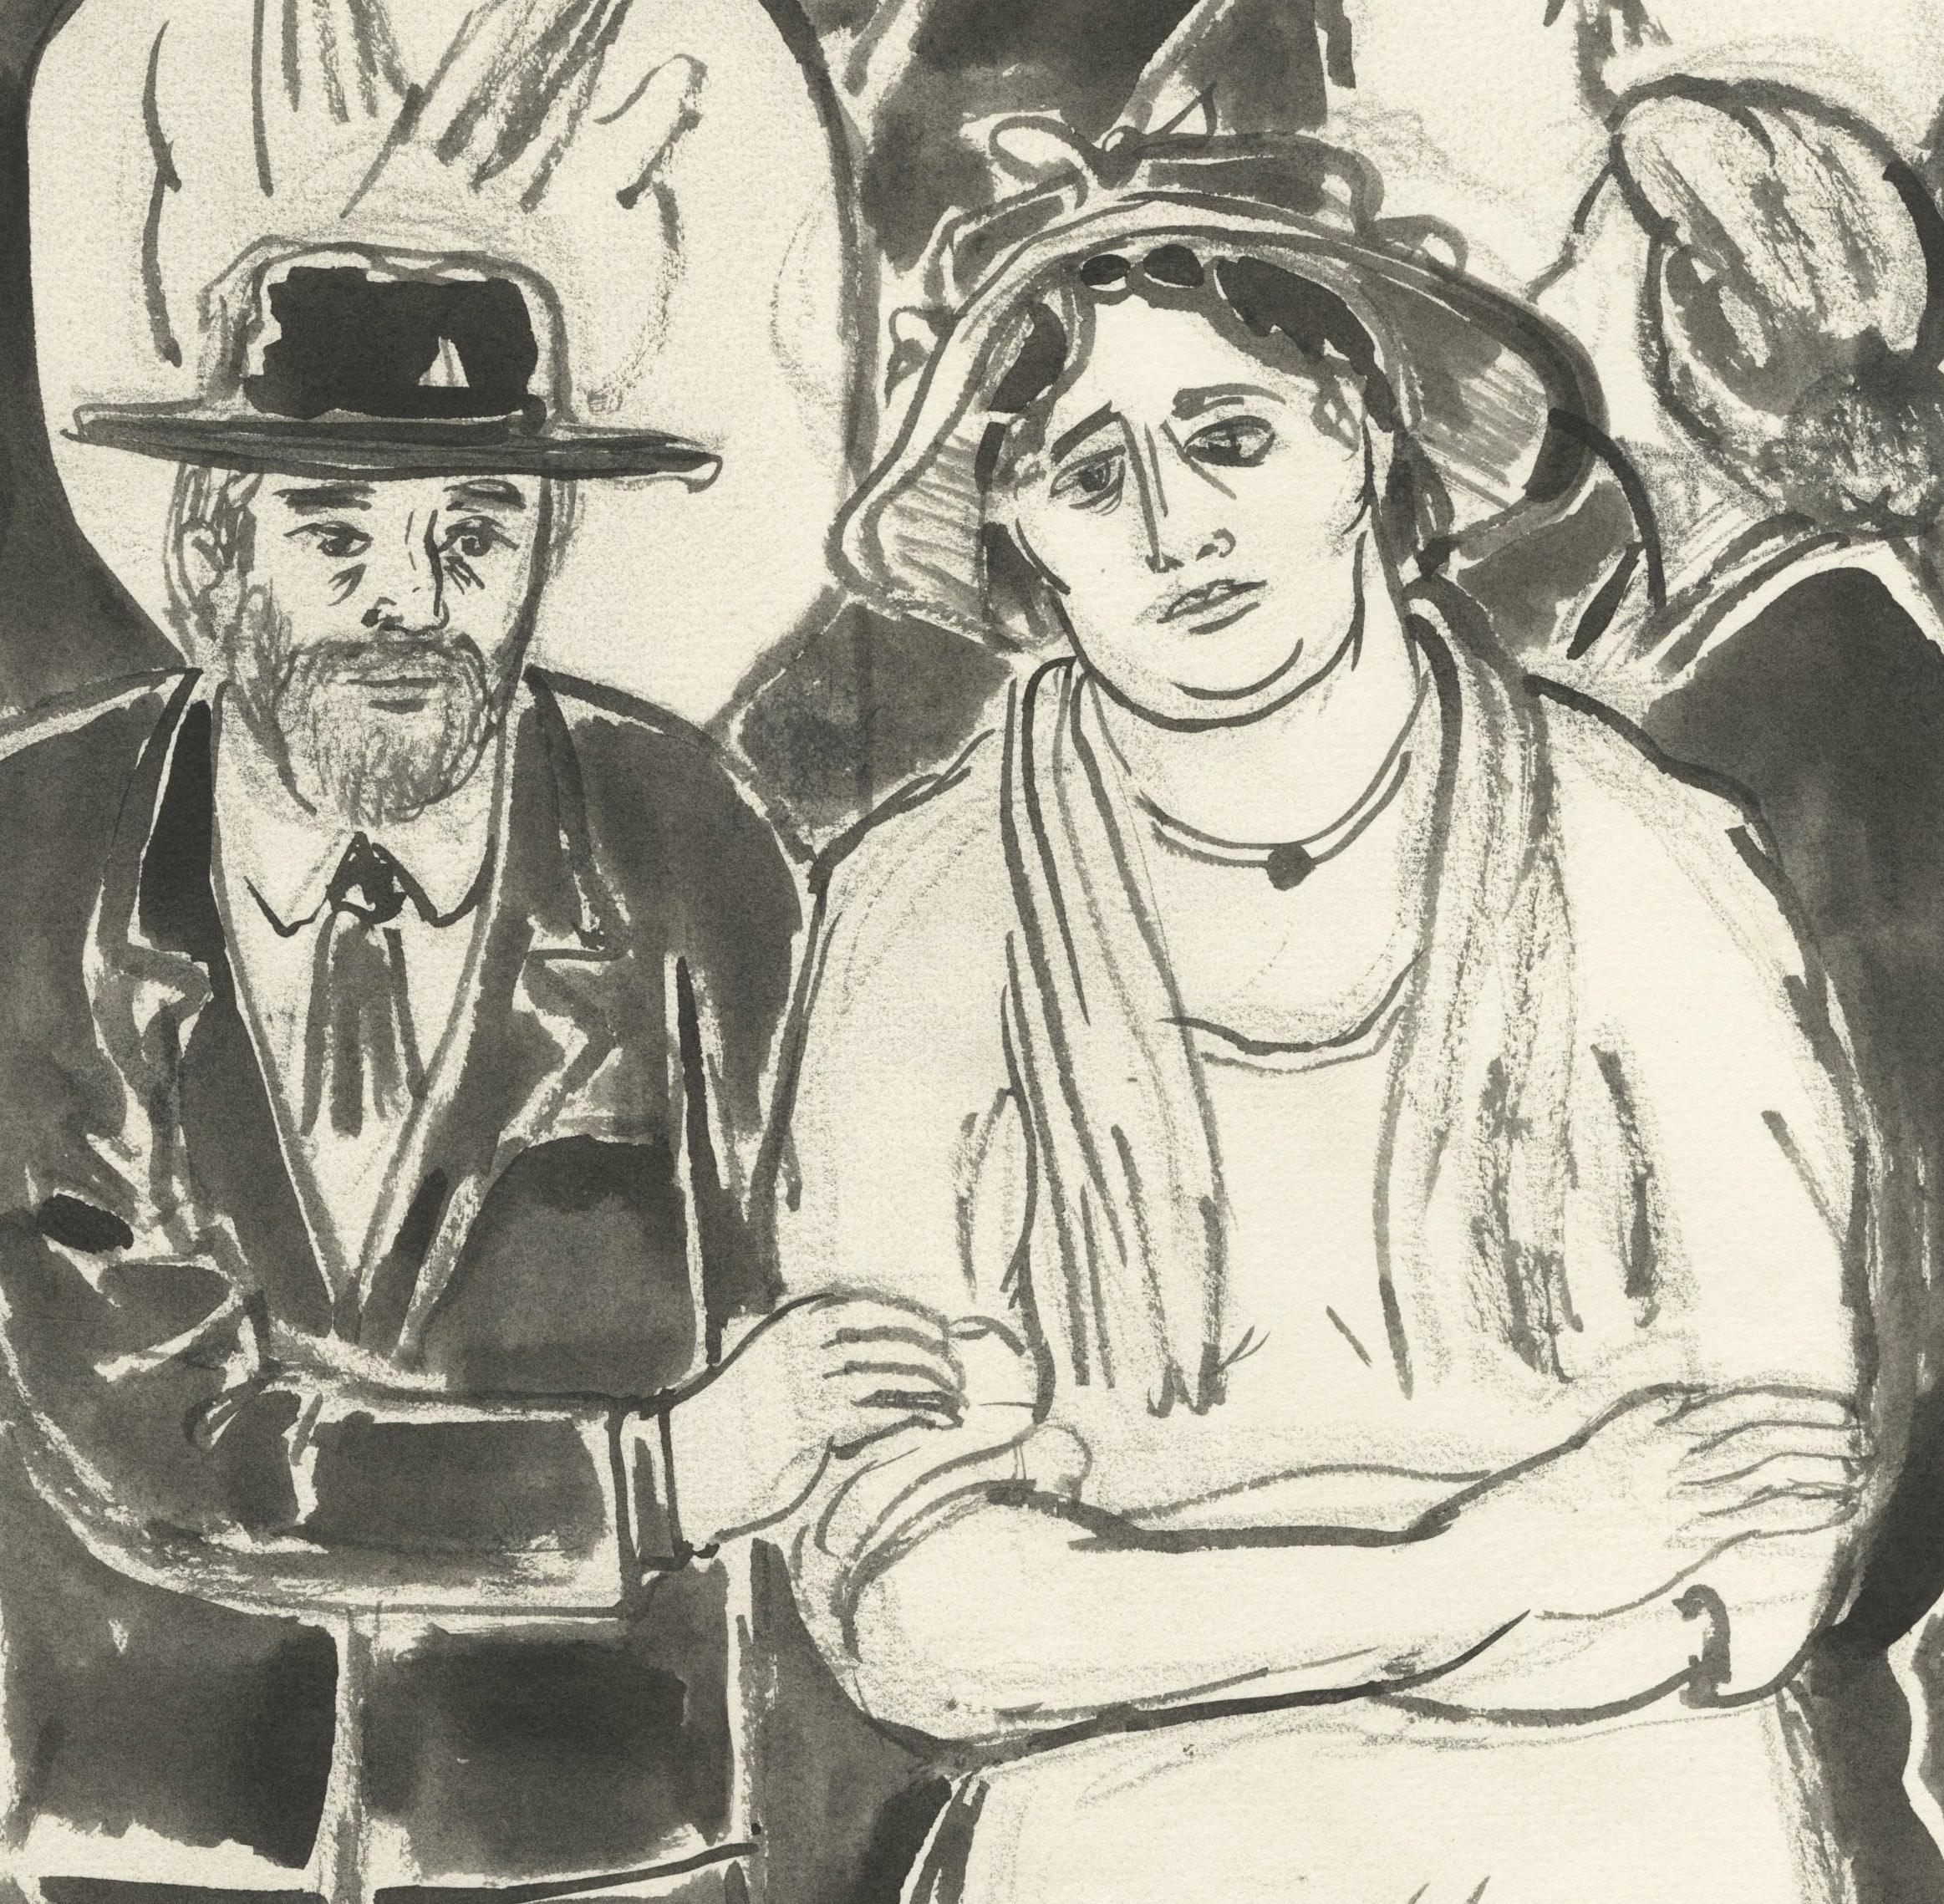 Lower East Side Crowd
Ink and ink wash on paper, c. 1910
Signed in ink lower center edge (see photo)
Signed with the initials lower right corner (see photo)
Probably depicts Jewish immigrants in the East Village of Manhattan.
Condition: Very